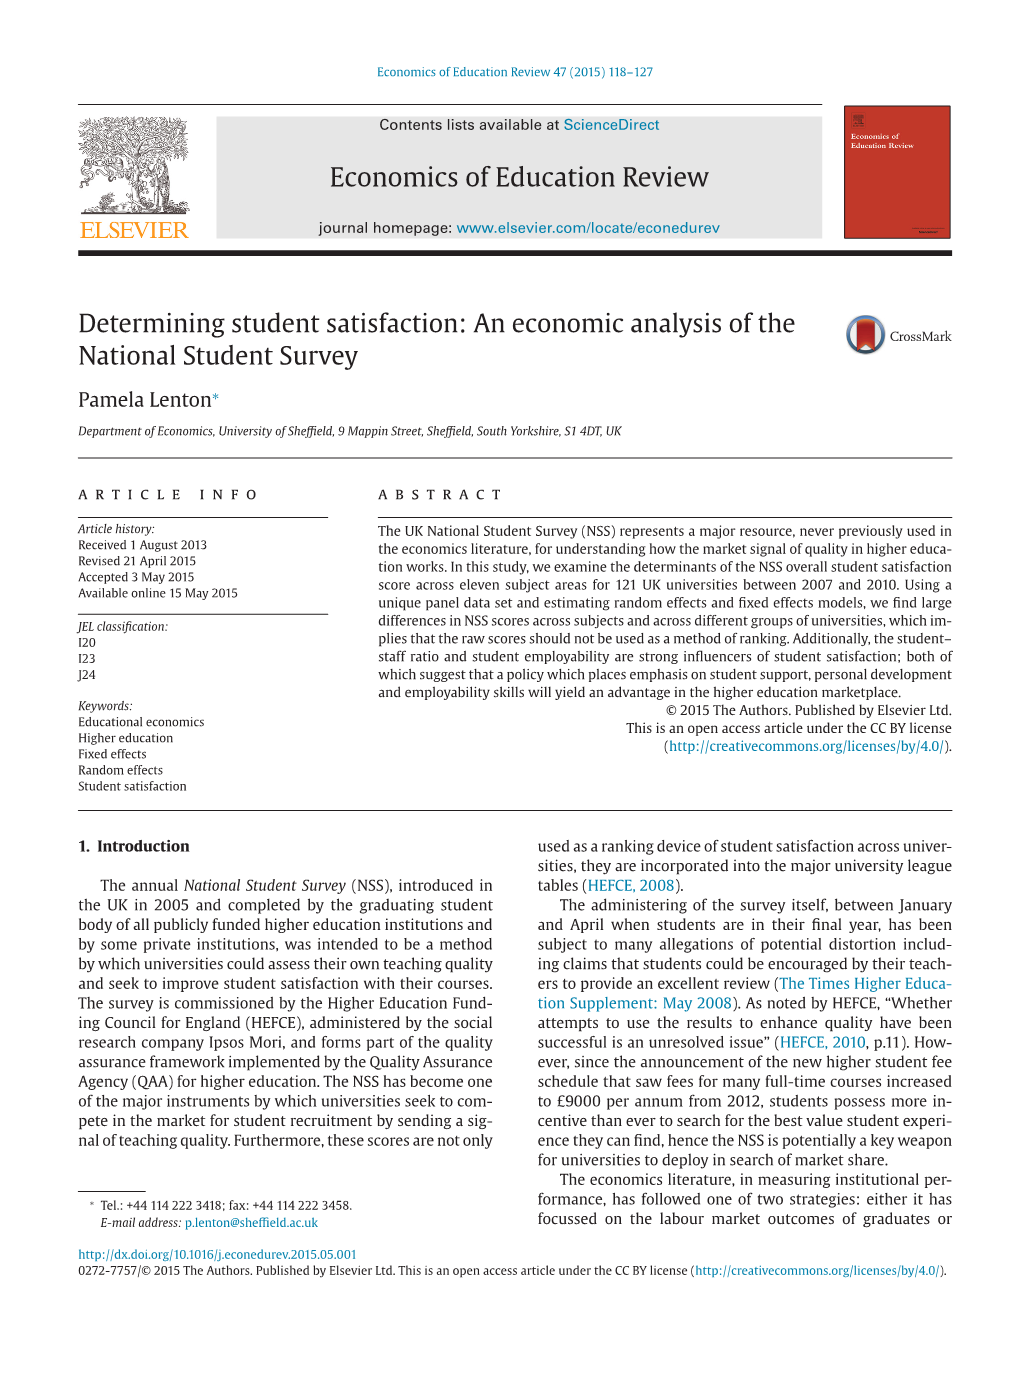 Determining Student Satisfaction: an Economic Analysis of the National Student Survey